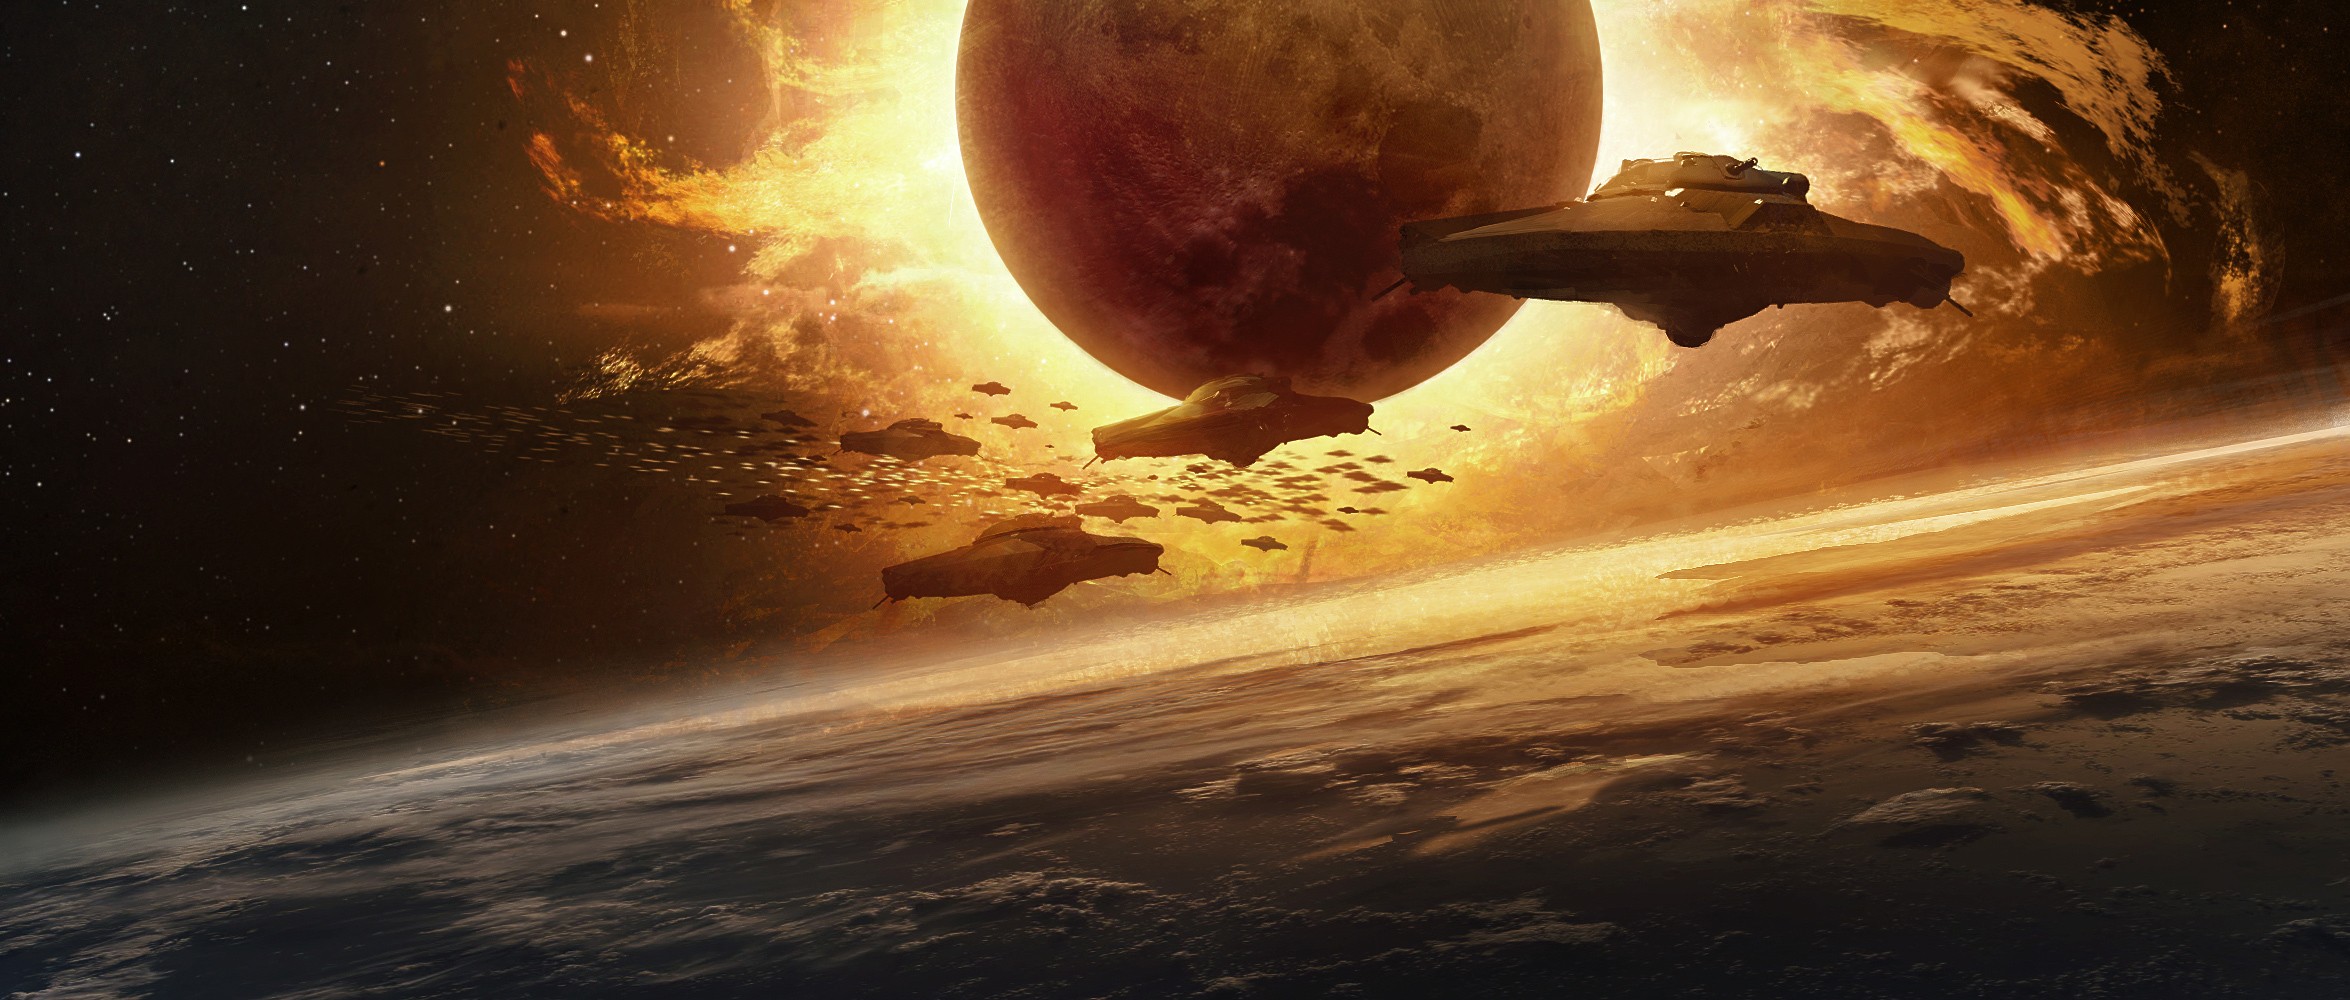 artwork, Apocalyptic, Science fiction, Iron Sky, Movies, Planet, Space, Spaceship Wallpaper